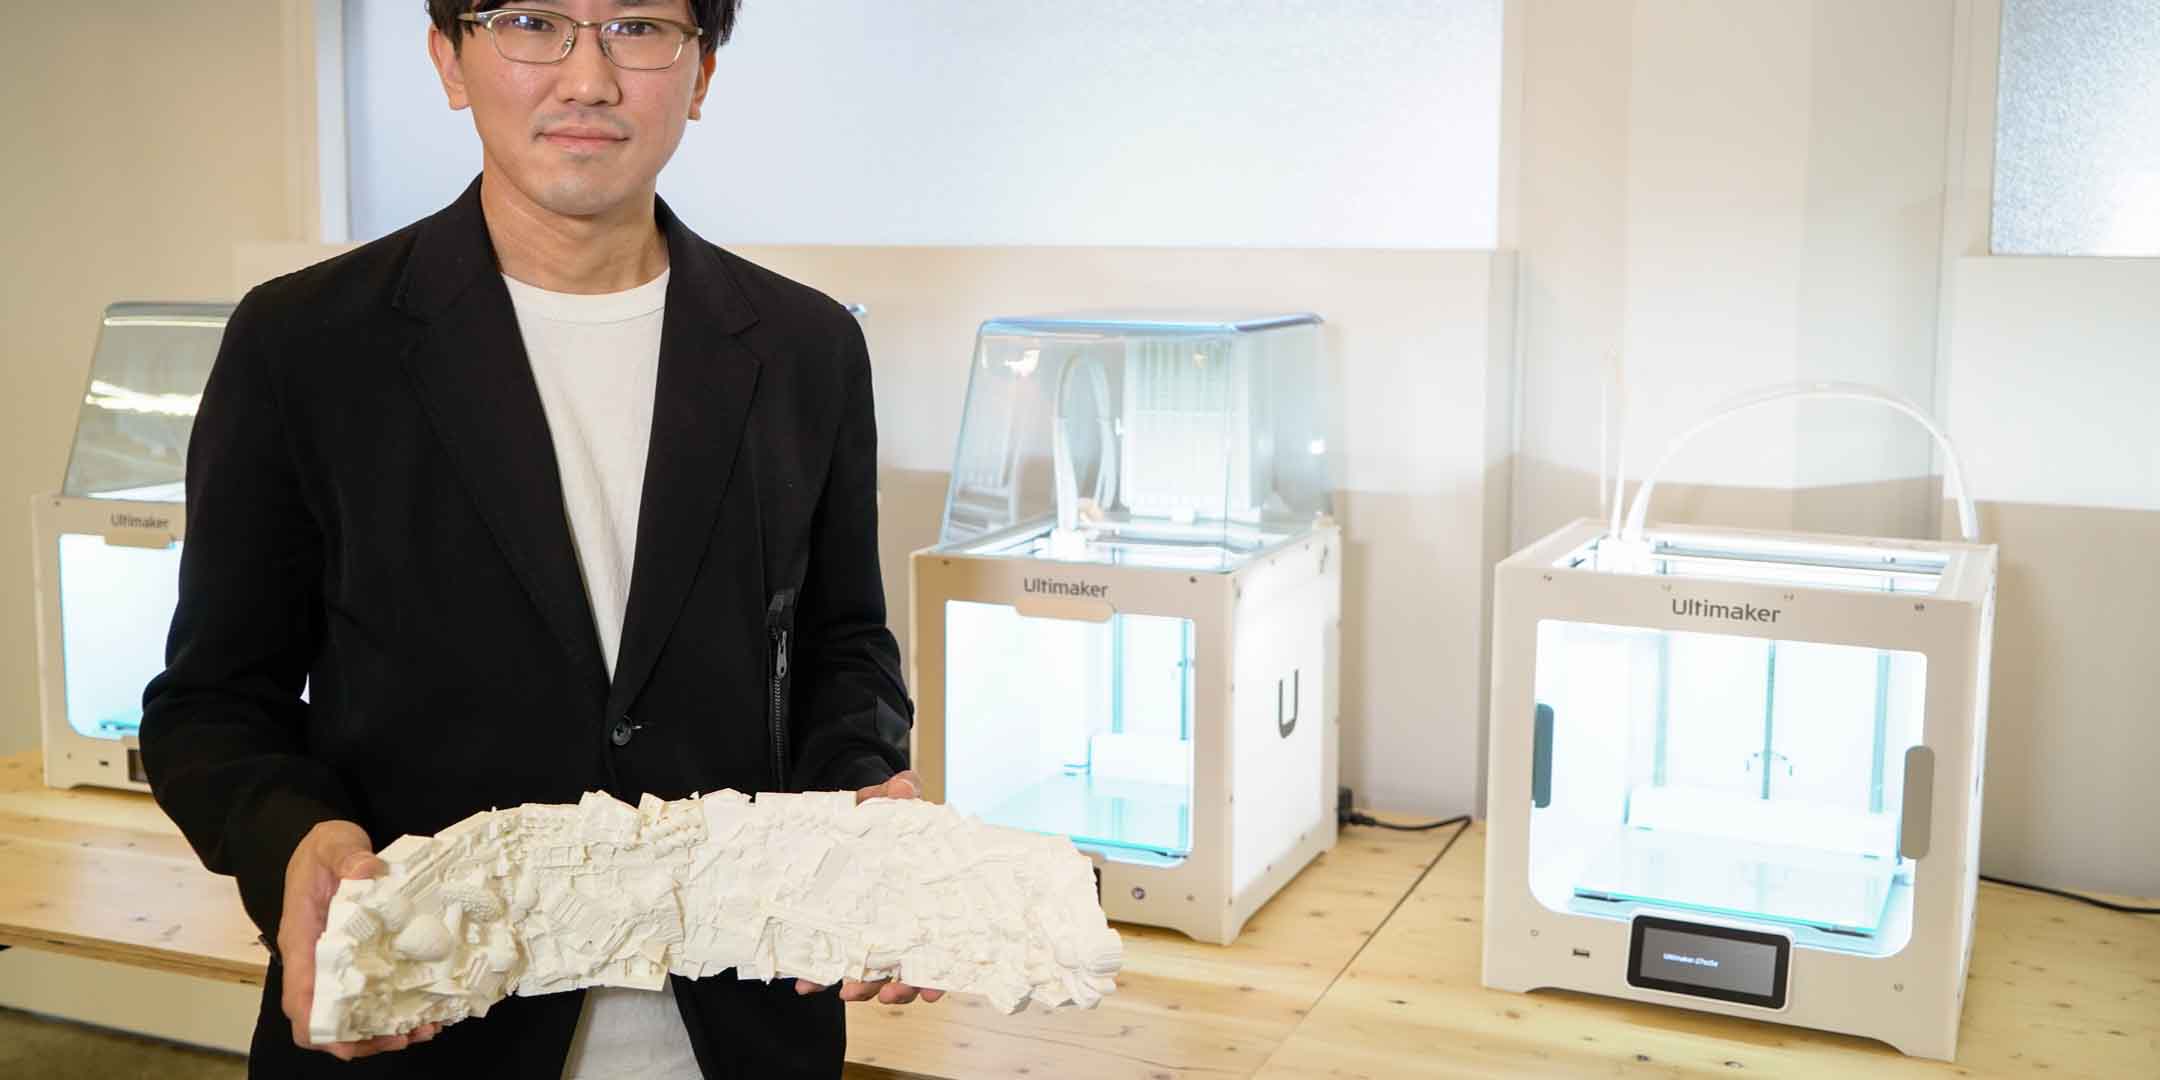 Toshiki Hirano holding a 3D printed architectural model